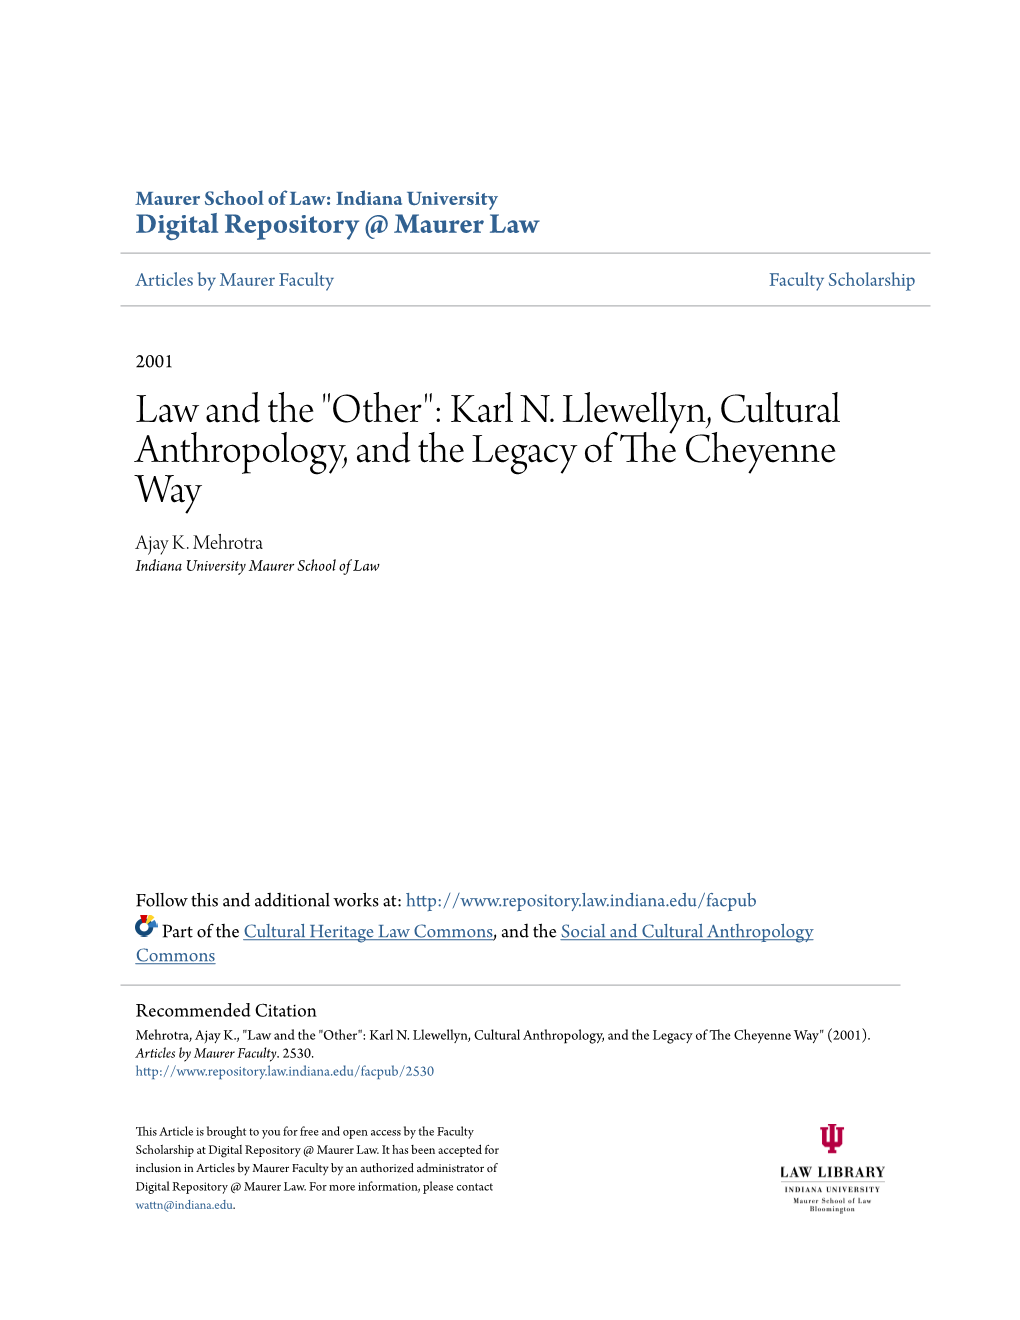 Law and the "Other": Karl N. Llewellyn, Cultural Anthropology, and the Legacy of the Hec Yenne Way Ajay K